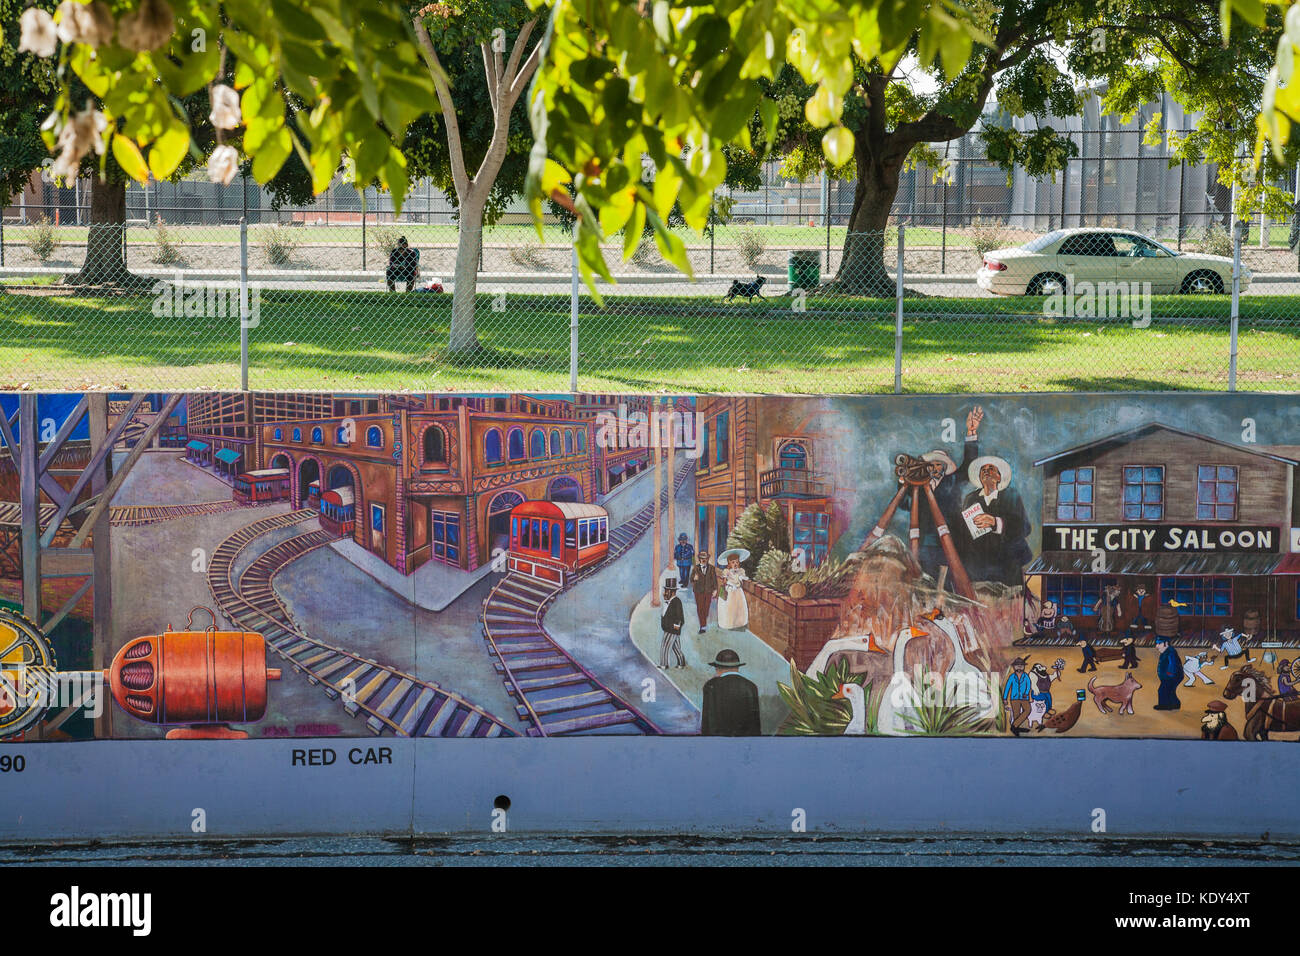 The Great Wall Of Los Angeles Is A Mural Designed By Judith Baca And Executed With The Help Of Over 400 Community Youth And Artists Tujunga Wash Los Stock Photo Alamy